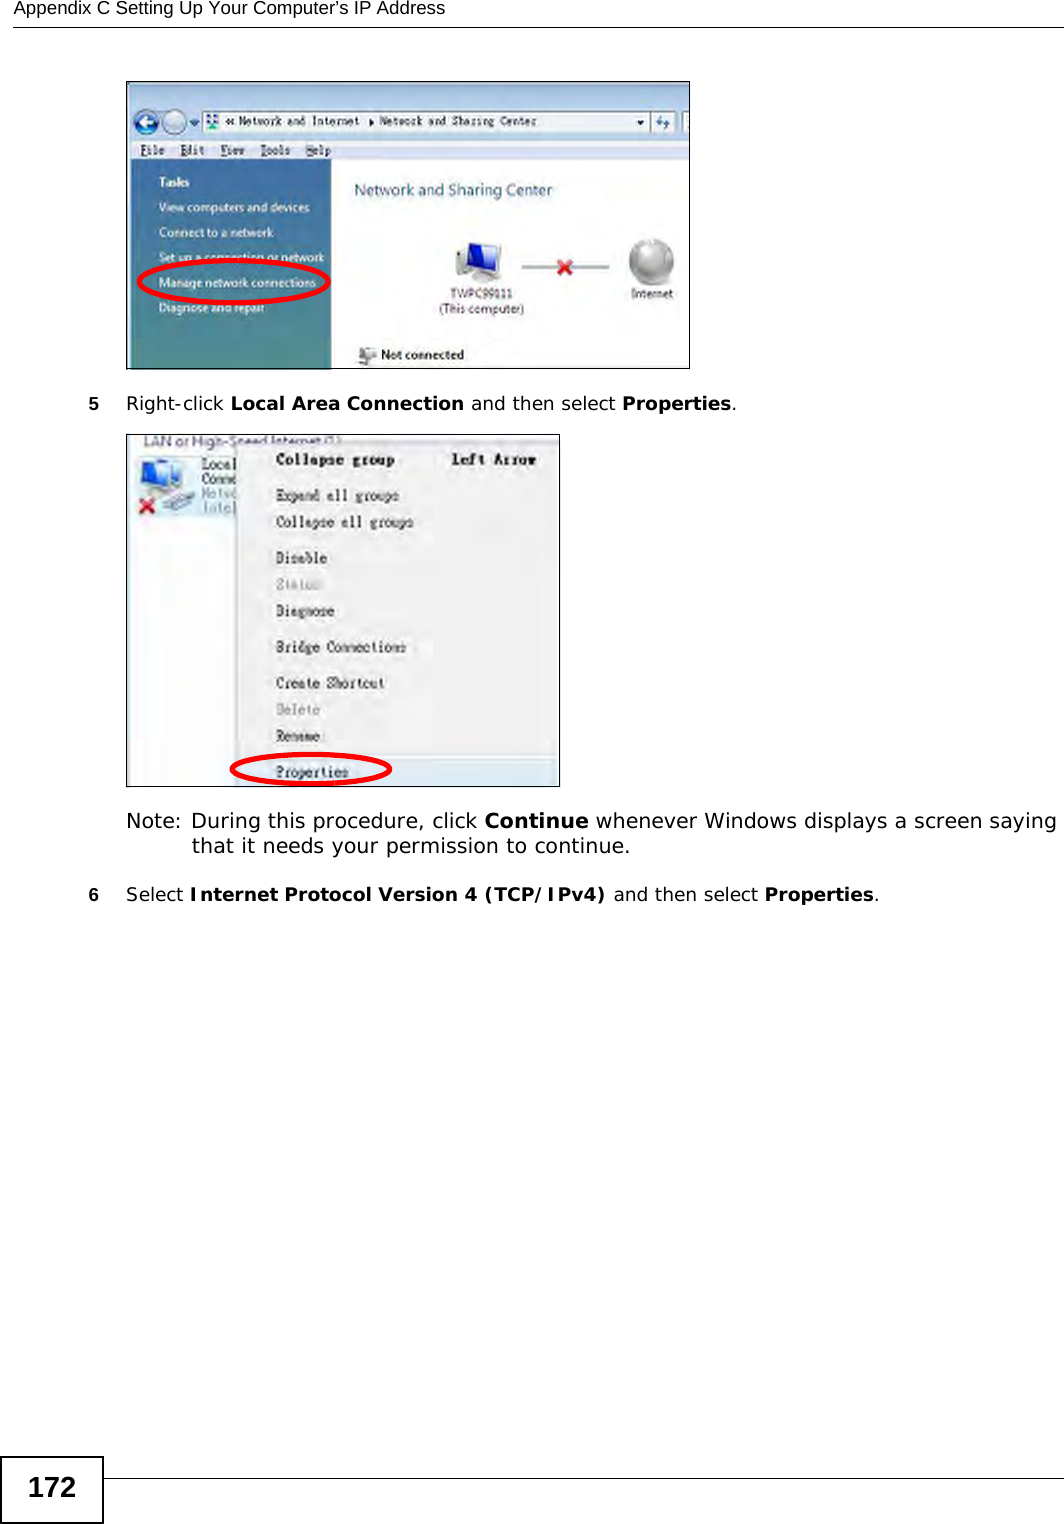 Appendix C Setting Up Your Computer’s IP Address1725Right-click Local Area Connection and then select Properties.Note: During this procedure, click Continue whenever Windows displays a screen saying that it needs your permission to continue.6Select Internet Protocol Version 4 (TCP/IPv4) and then select Properties.